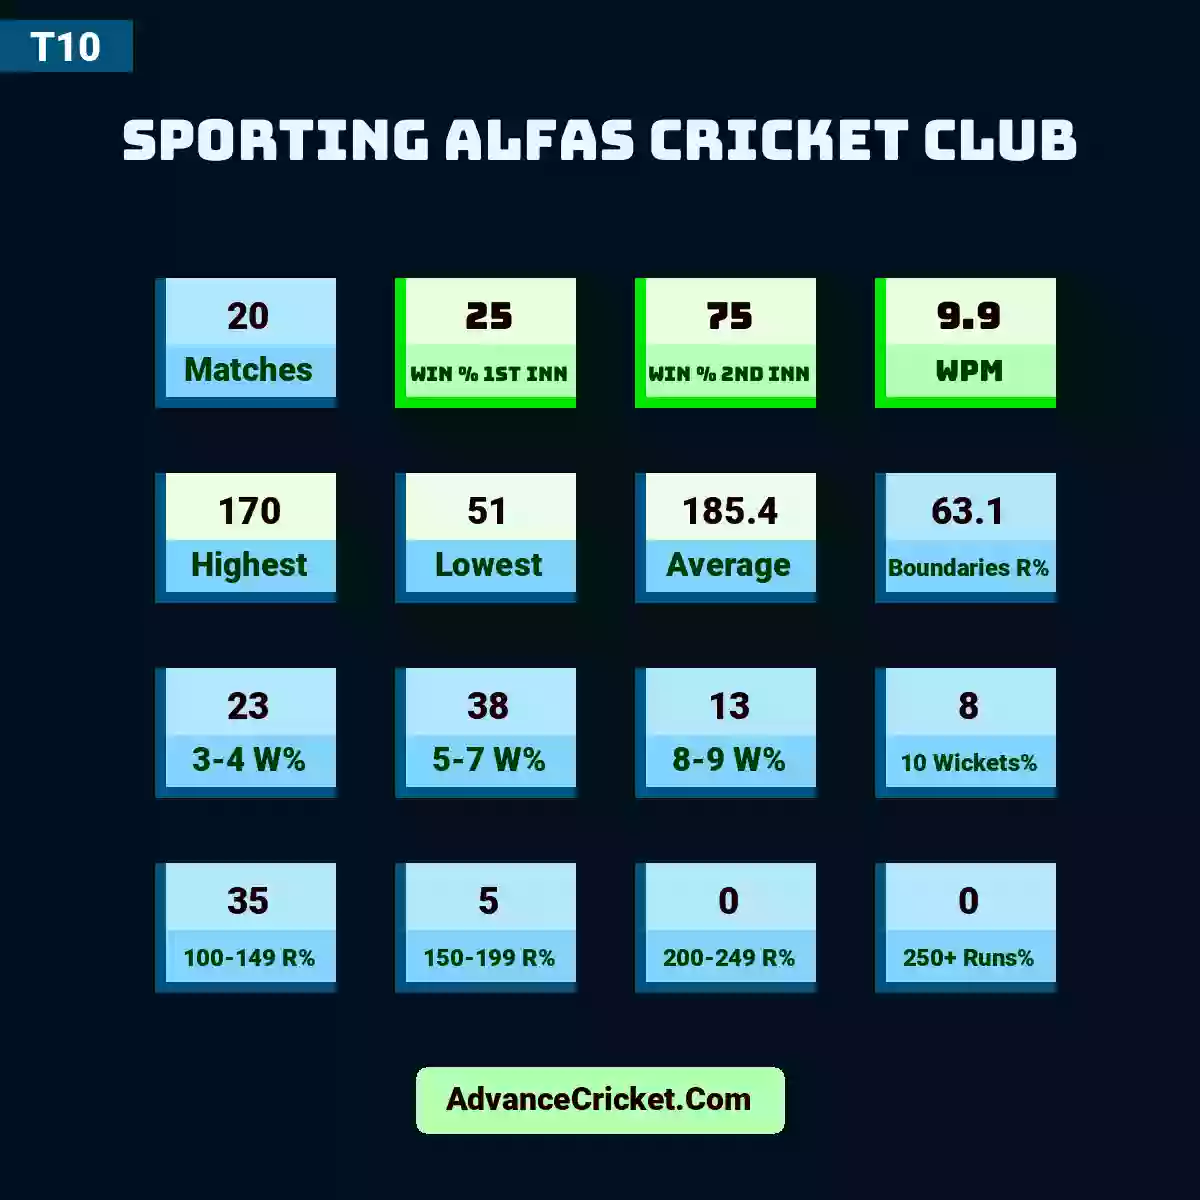 Image showing Sporting Alfas Cricket Club with Matches: 20, Win % 1st Inn: 25, Win % 2nd Inn: 75, WPM: 9.9, Highest: 170, Lowest: 51, Average: 185.4, Boundaries R%: 63.1, 3-4 W%: 23, 5-7 W%: 38, 8-9 W%: 13, 10 Wickets%: 8, 100-149 R%: 35, 150-199 R%: 5, 200-249 R%: 0, 250+ Runs%: 0.